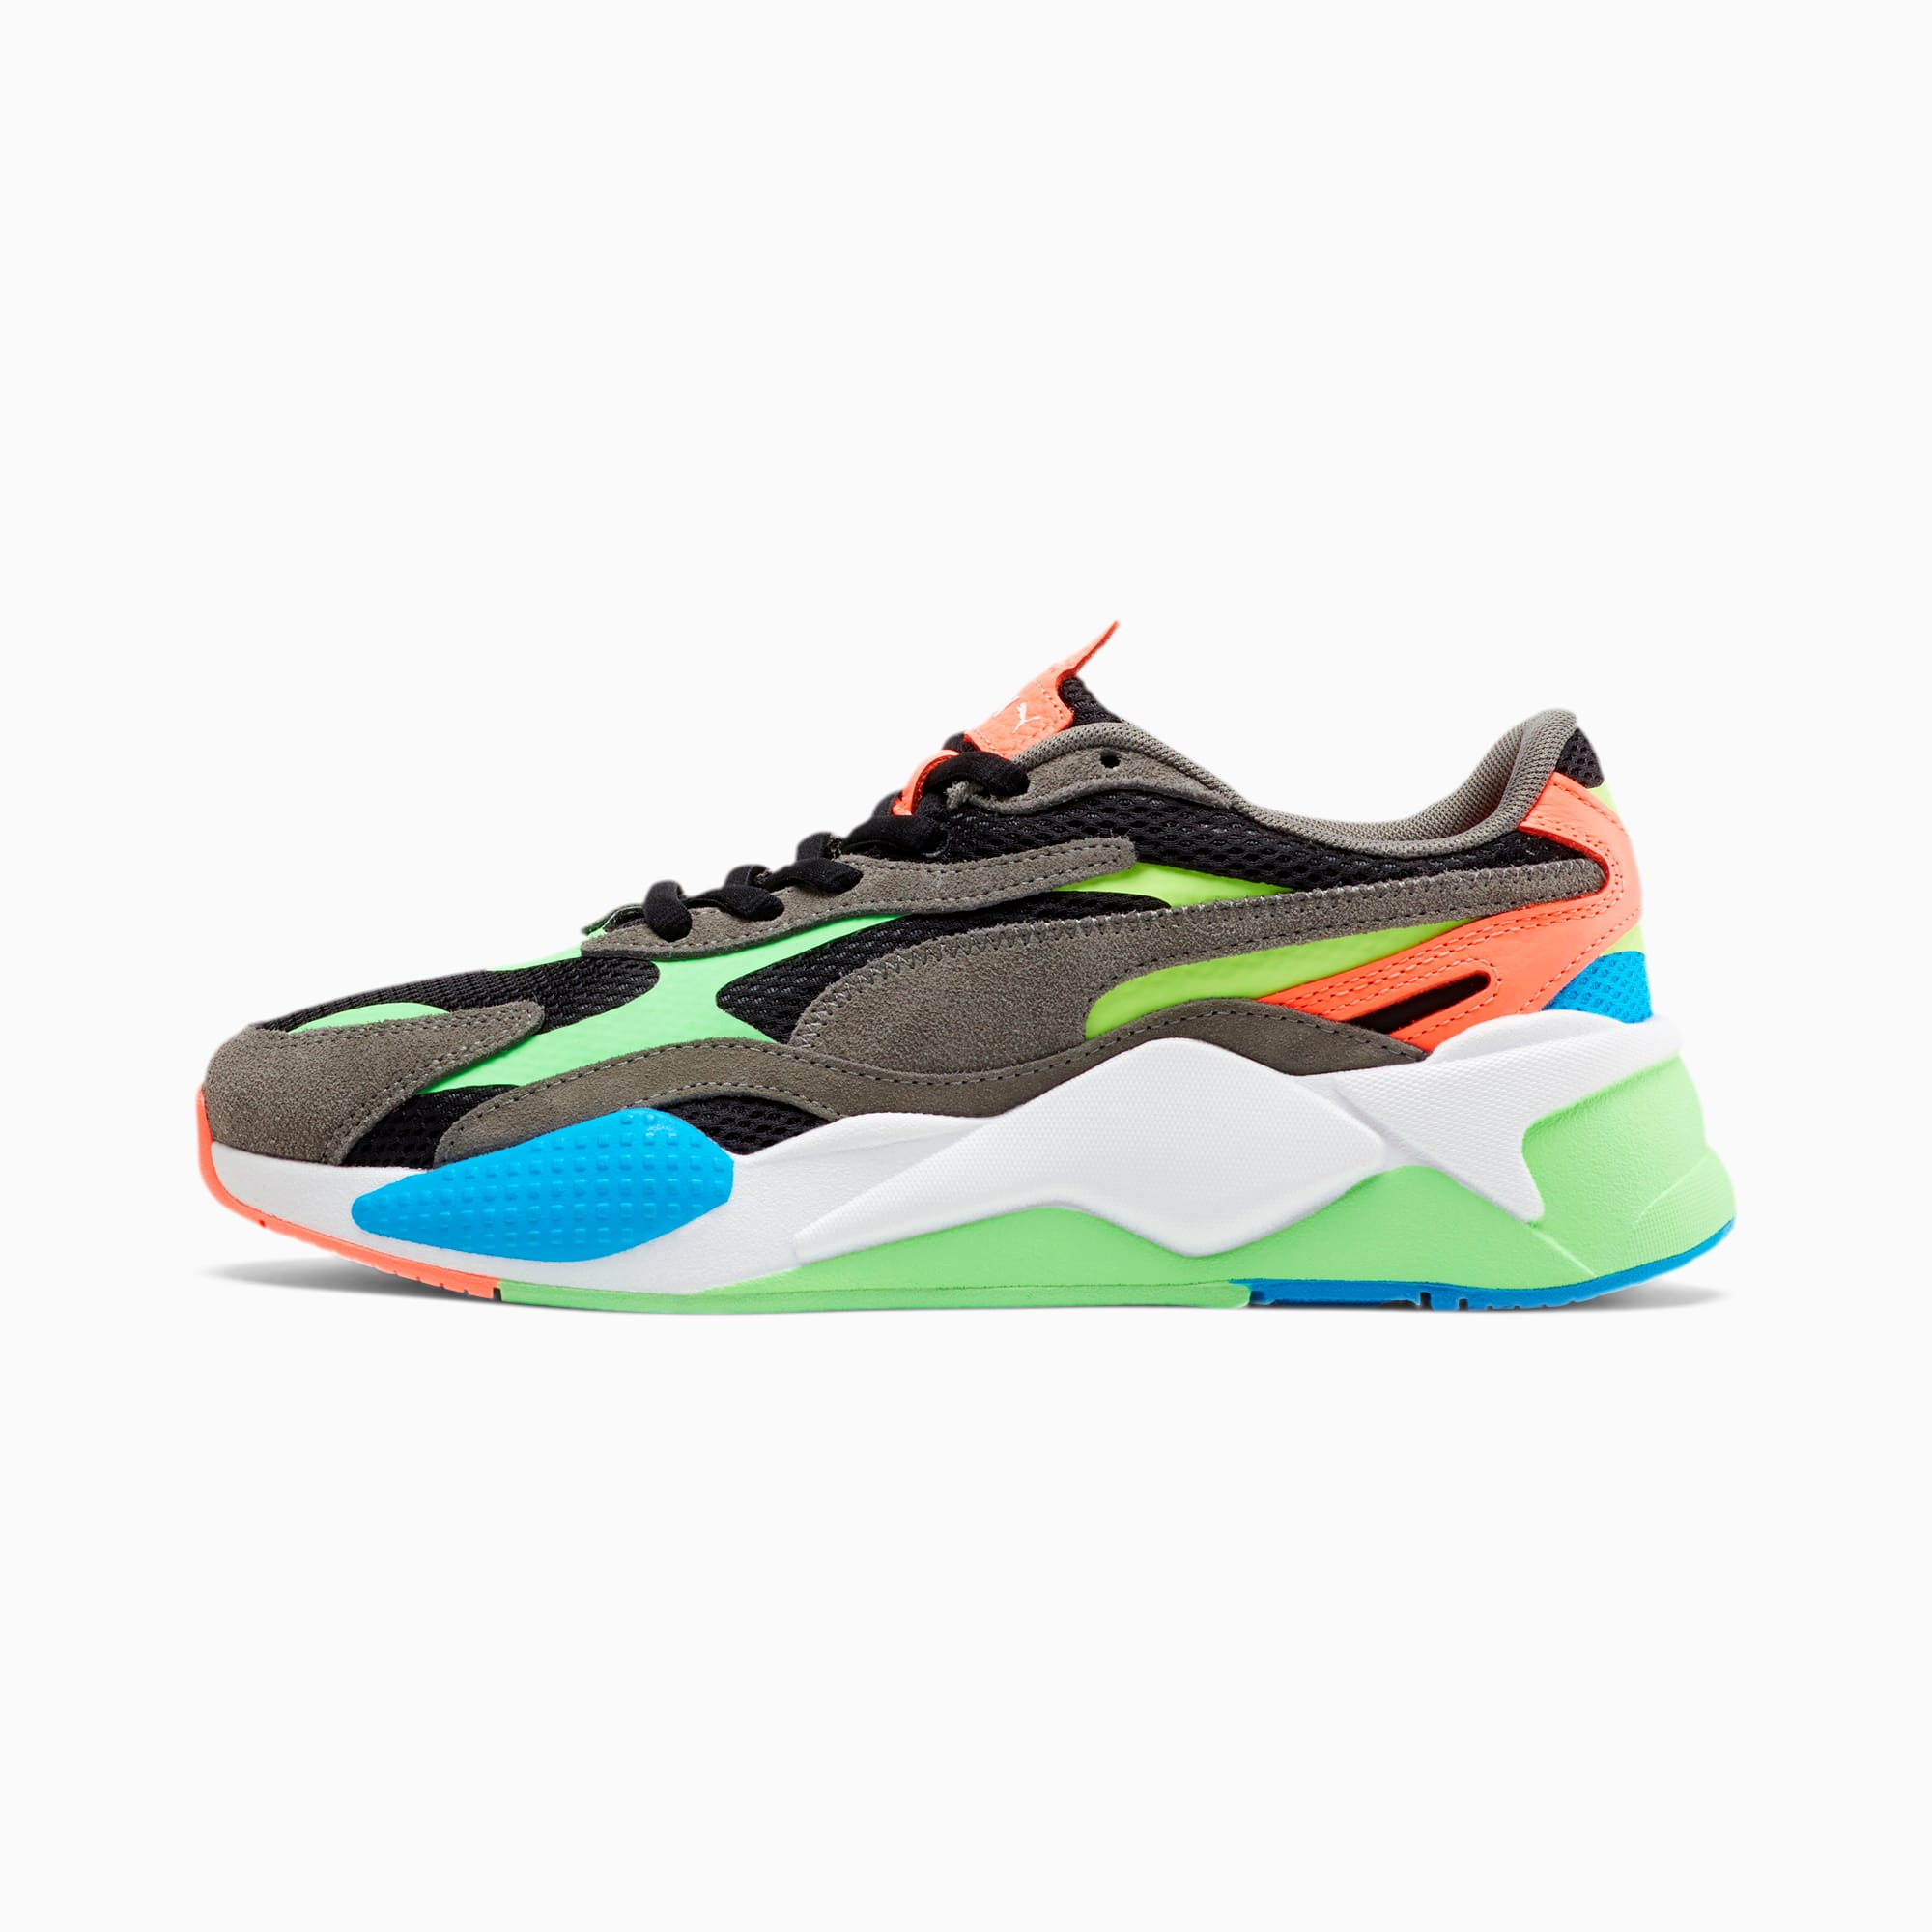 RS-X³ NRGY Men's Sneakers | PUMA US